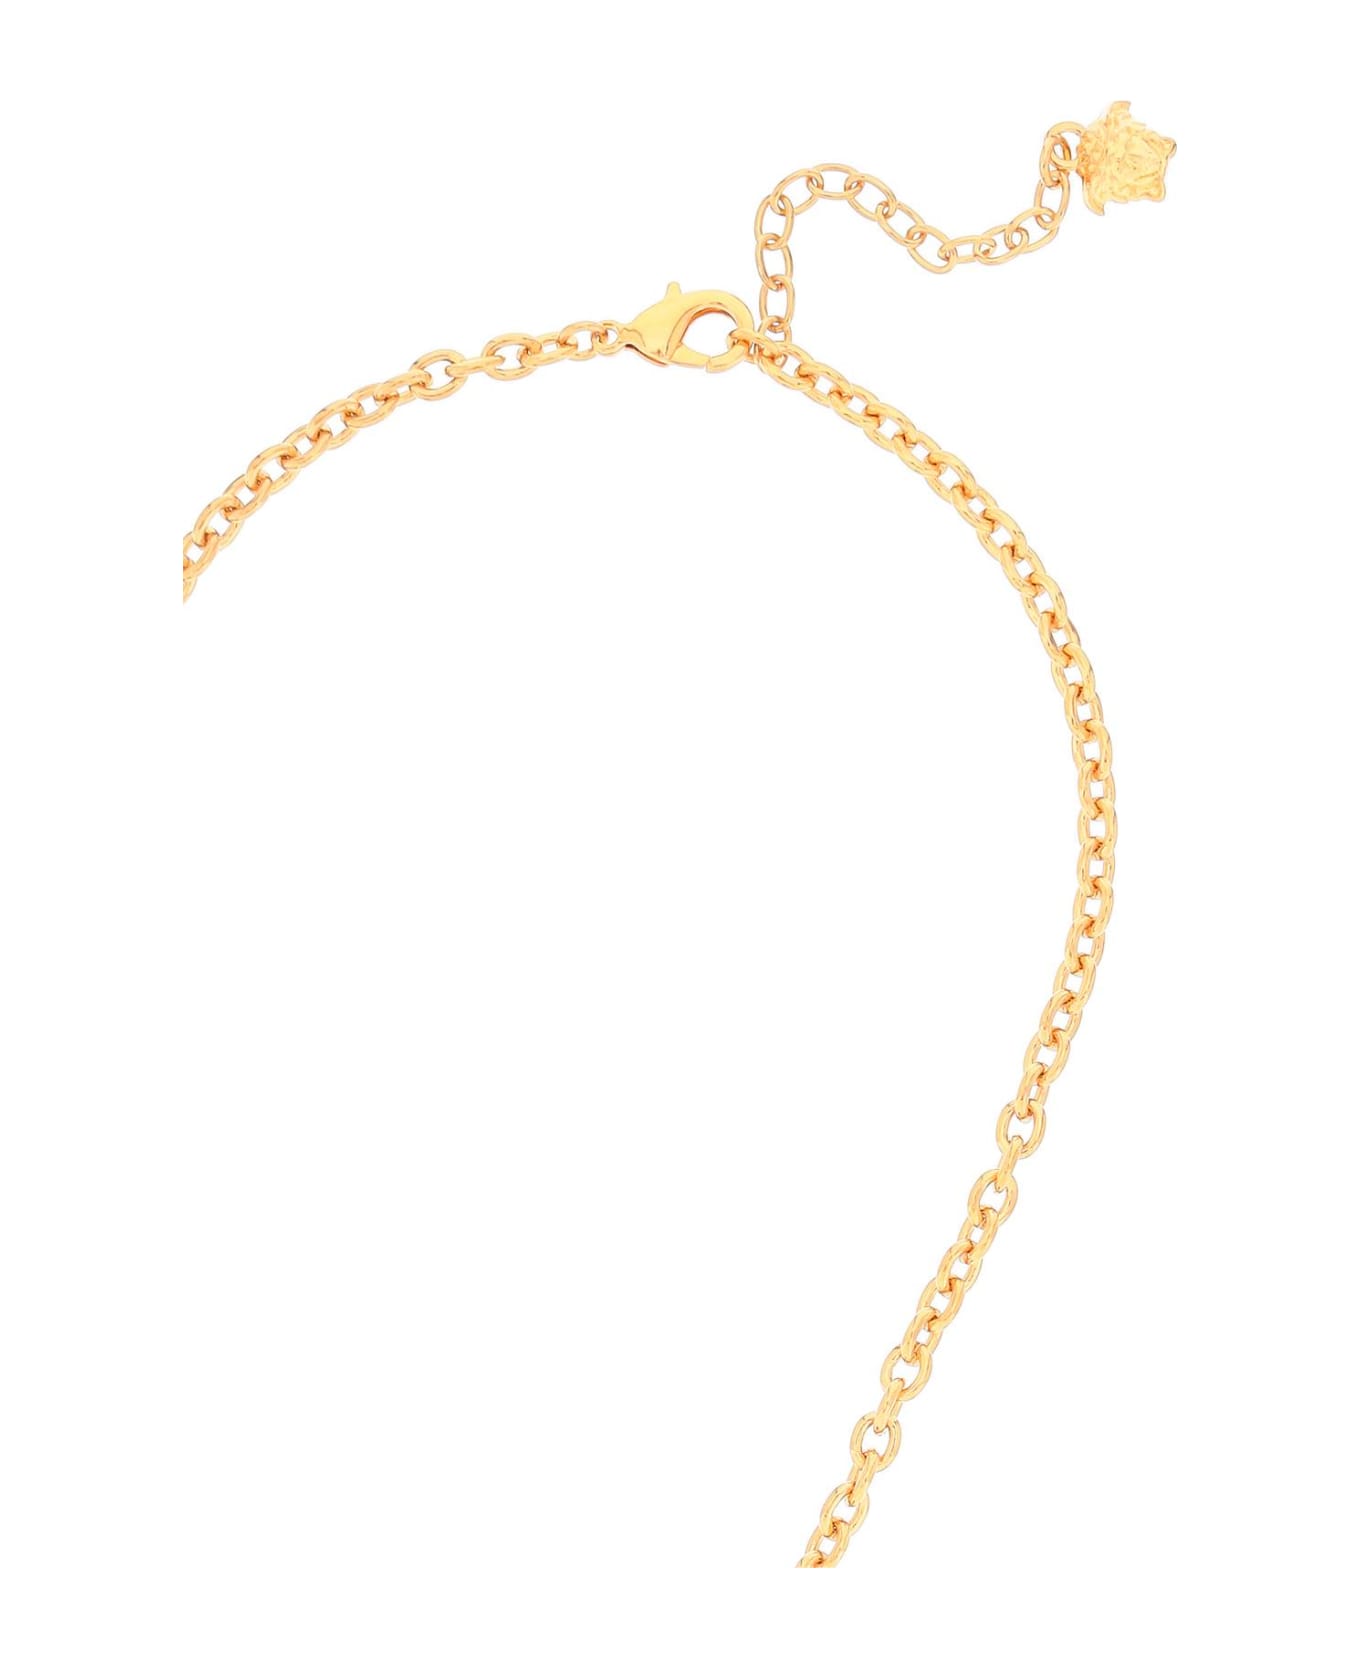 Versace La Medusa Necklace With Crystals - CRYSTAL VERSACE GOLD (Gold)